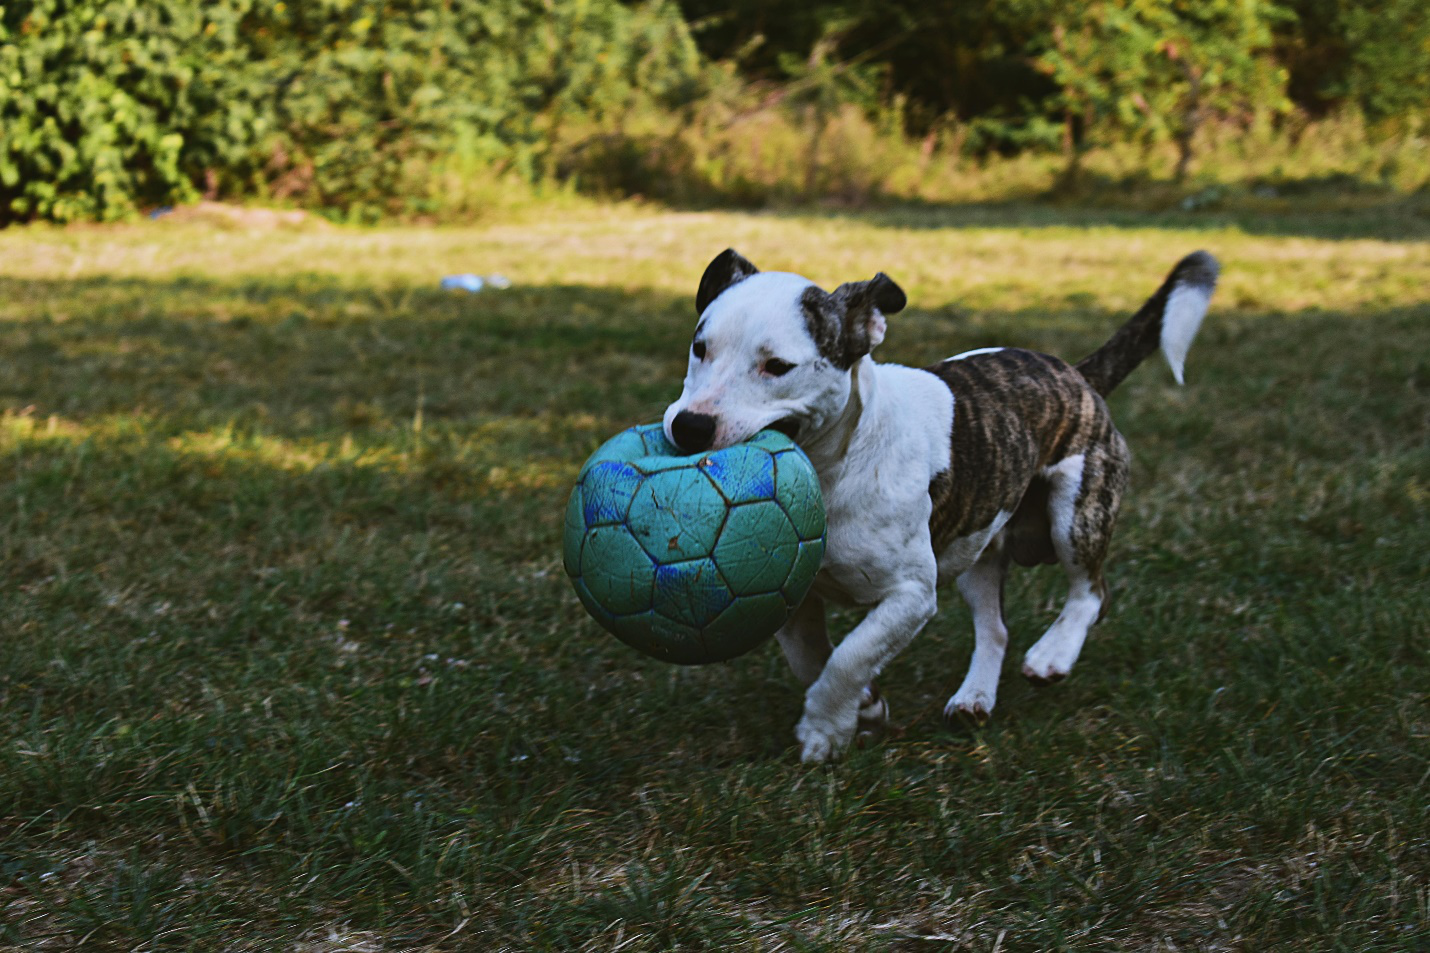 A black, brown, and white puppy plays outdoors, holding a large soccer ball in his mouth in the grass, making the importance of dog daycare apparent for young pups to avoid destructive behavior.